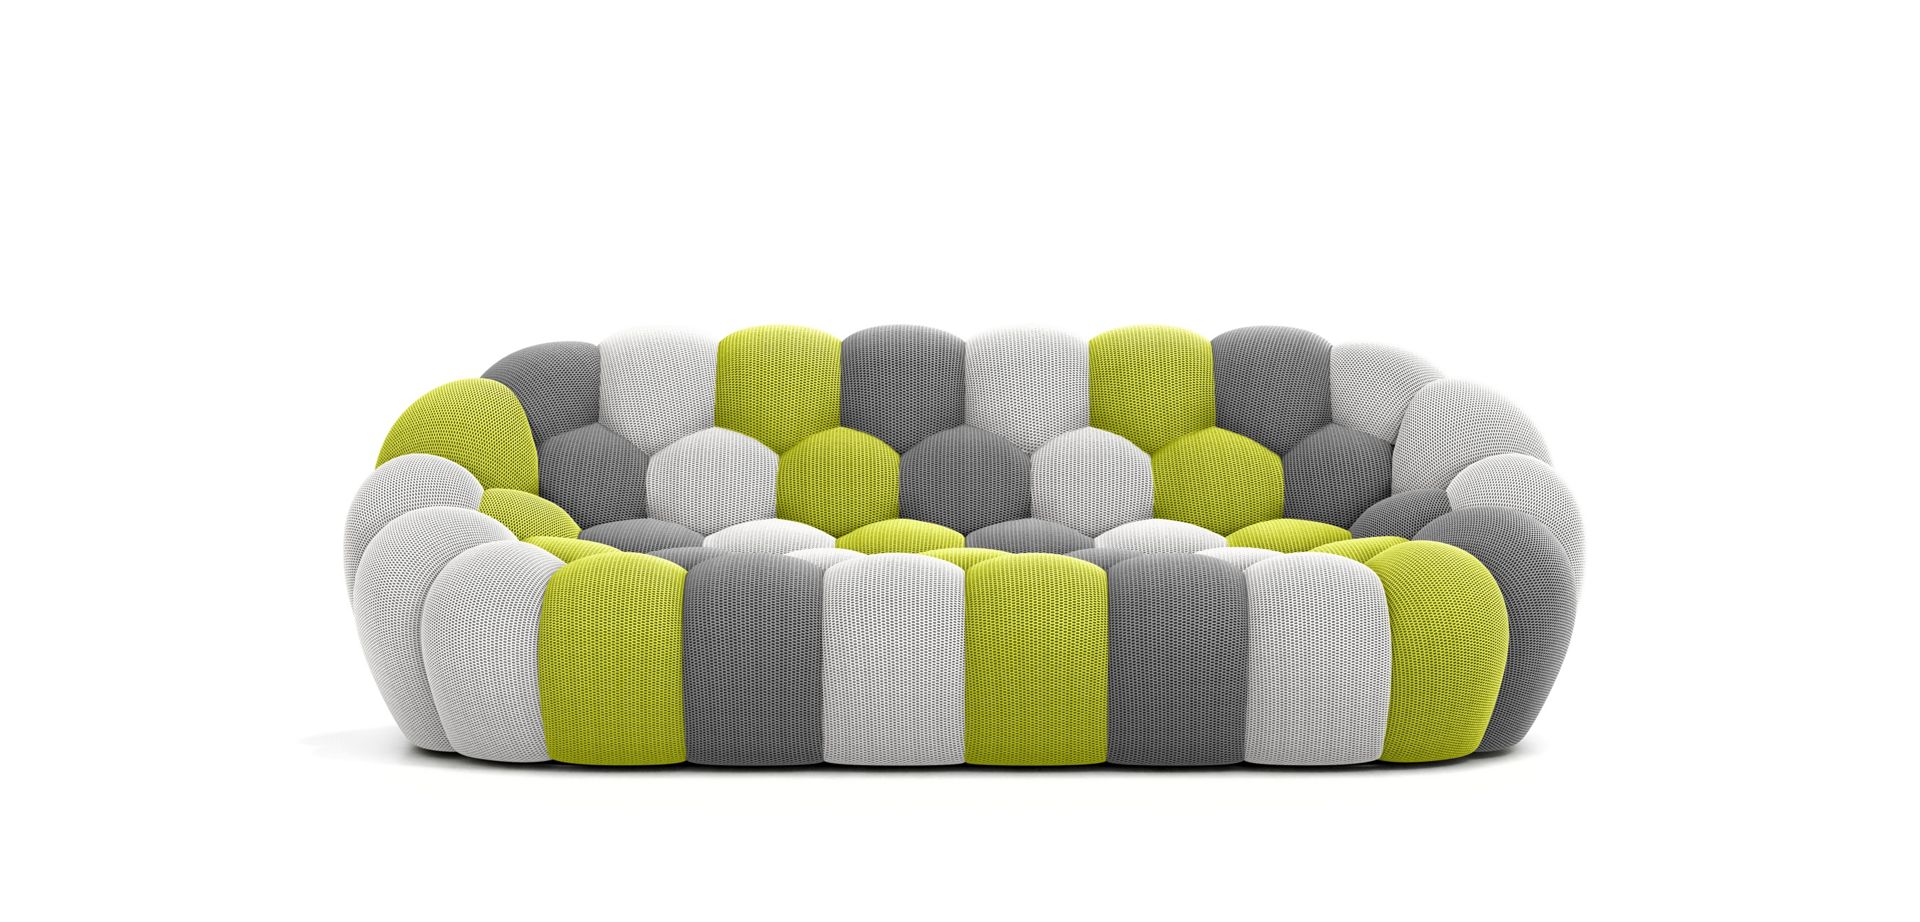 large 3-seat sofa - techno 3D image number 6